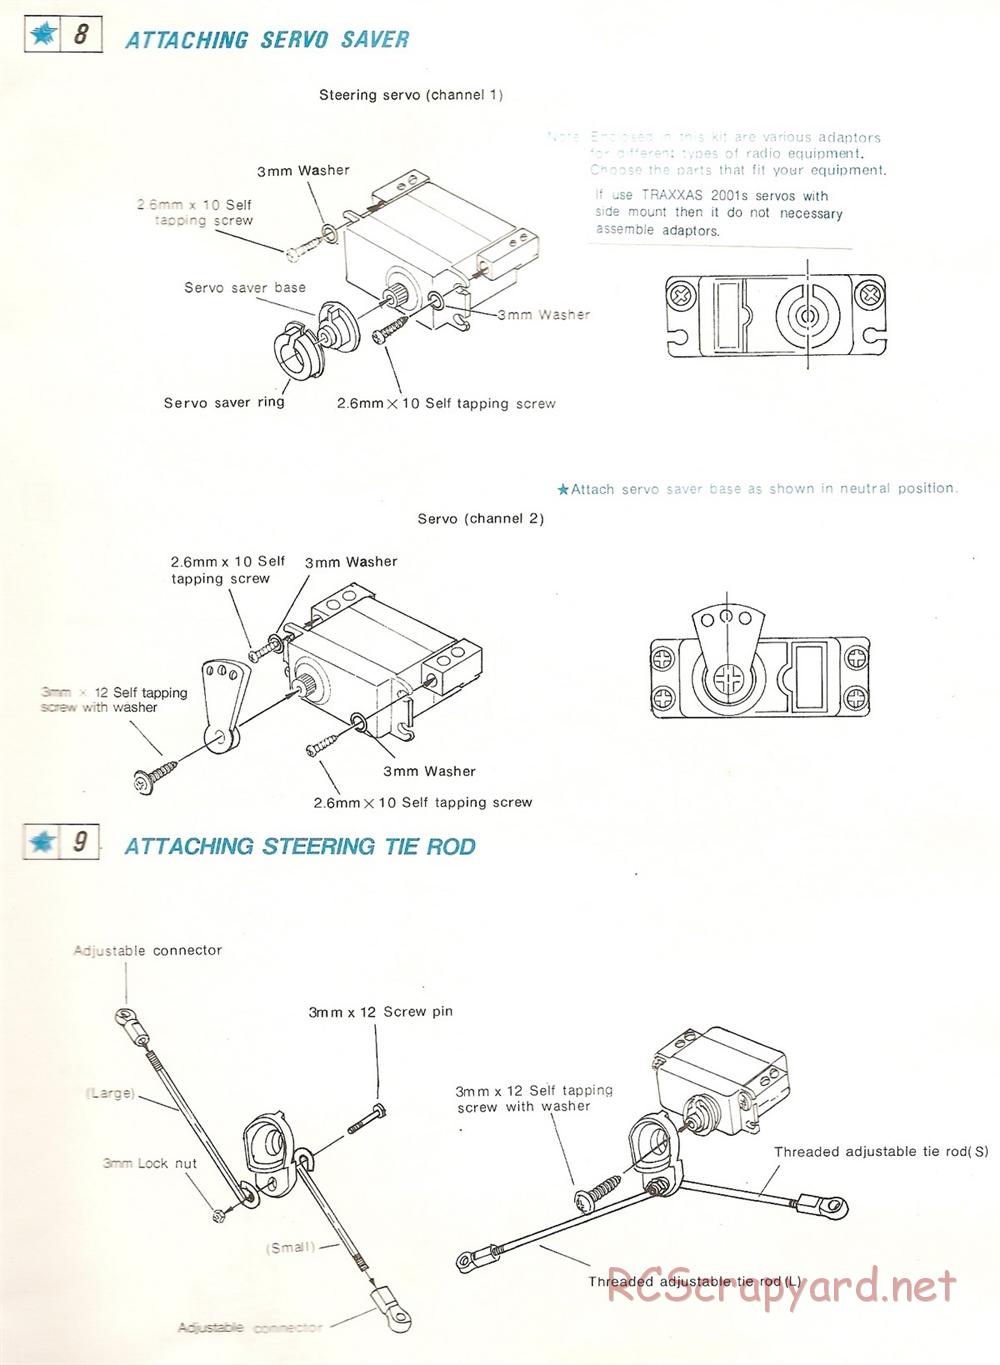 Traxxas - The Cat (1987) - Manual - Page 5